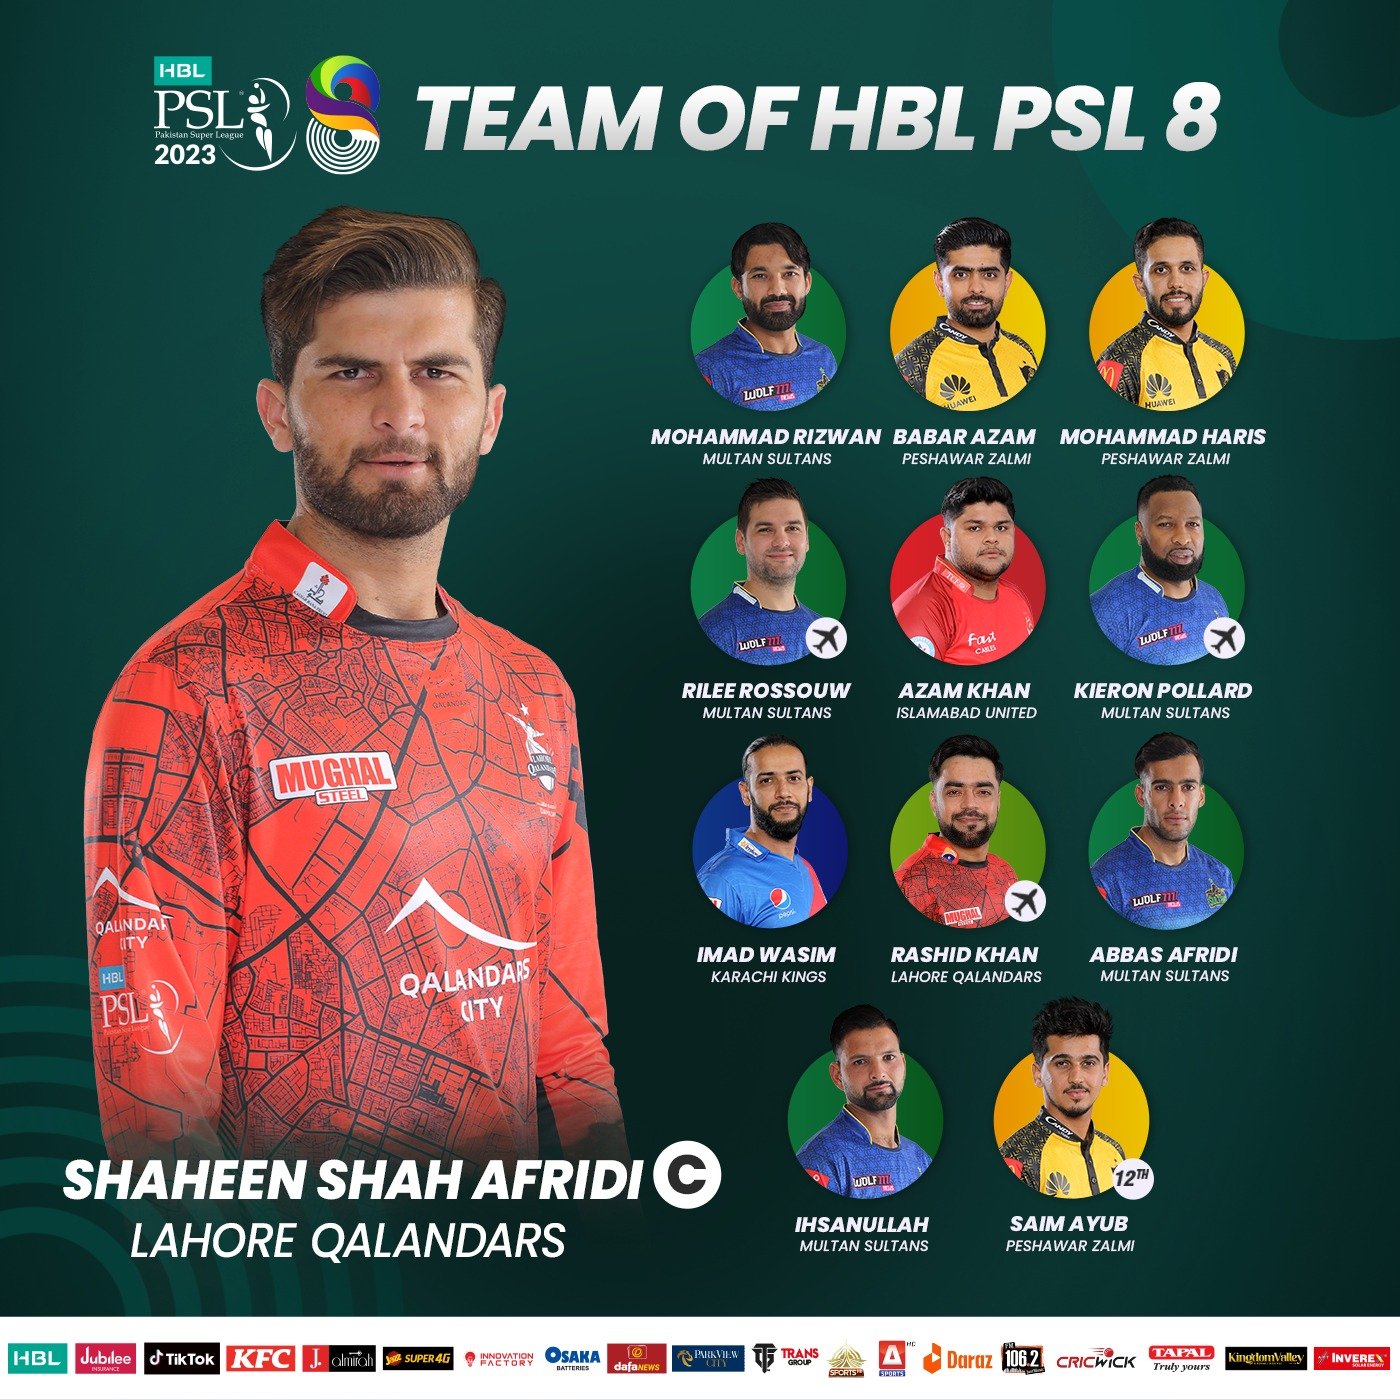 Shaheen Shah Afridi named Team of HBL PSL 8 captain Press Release PCB